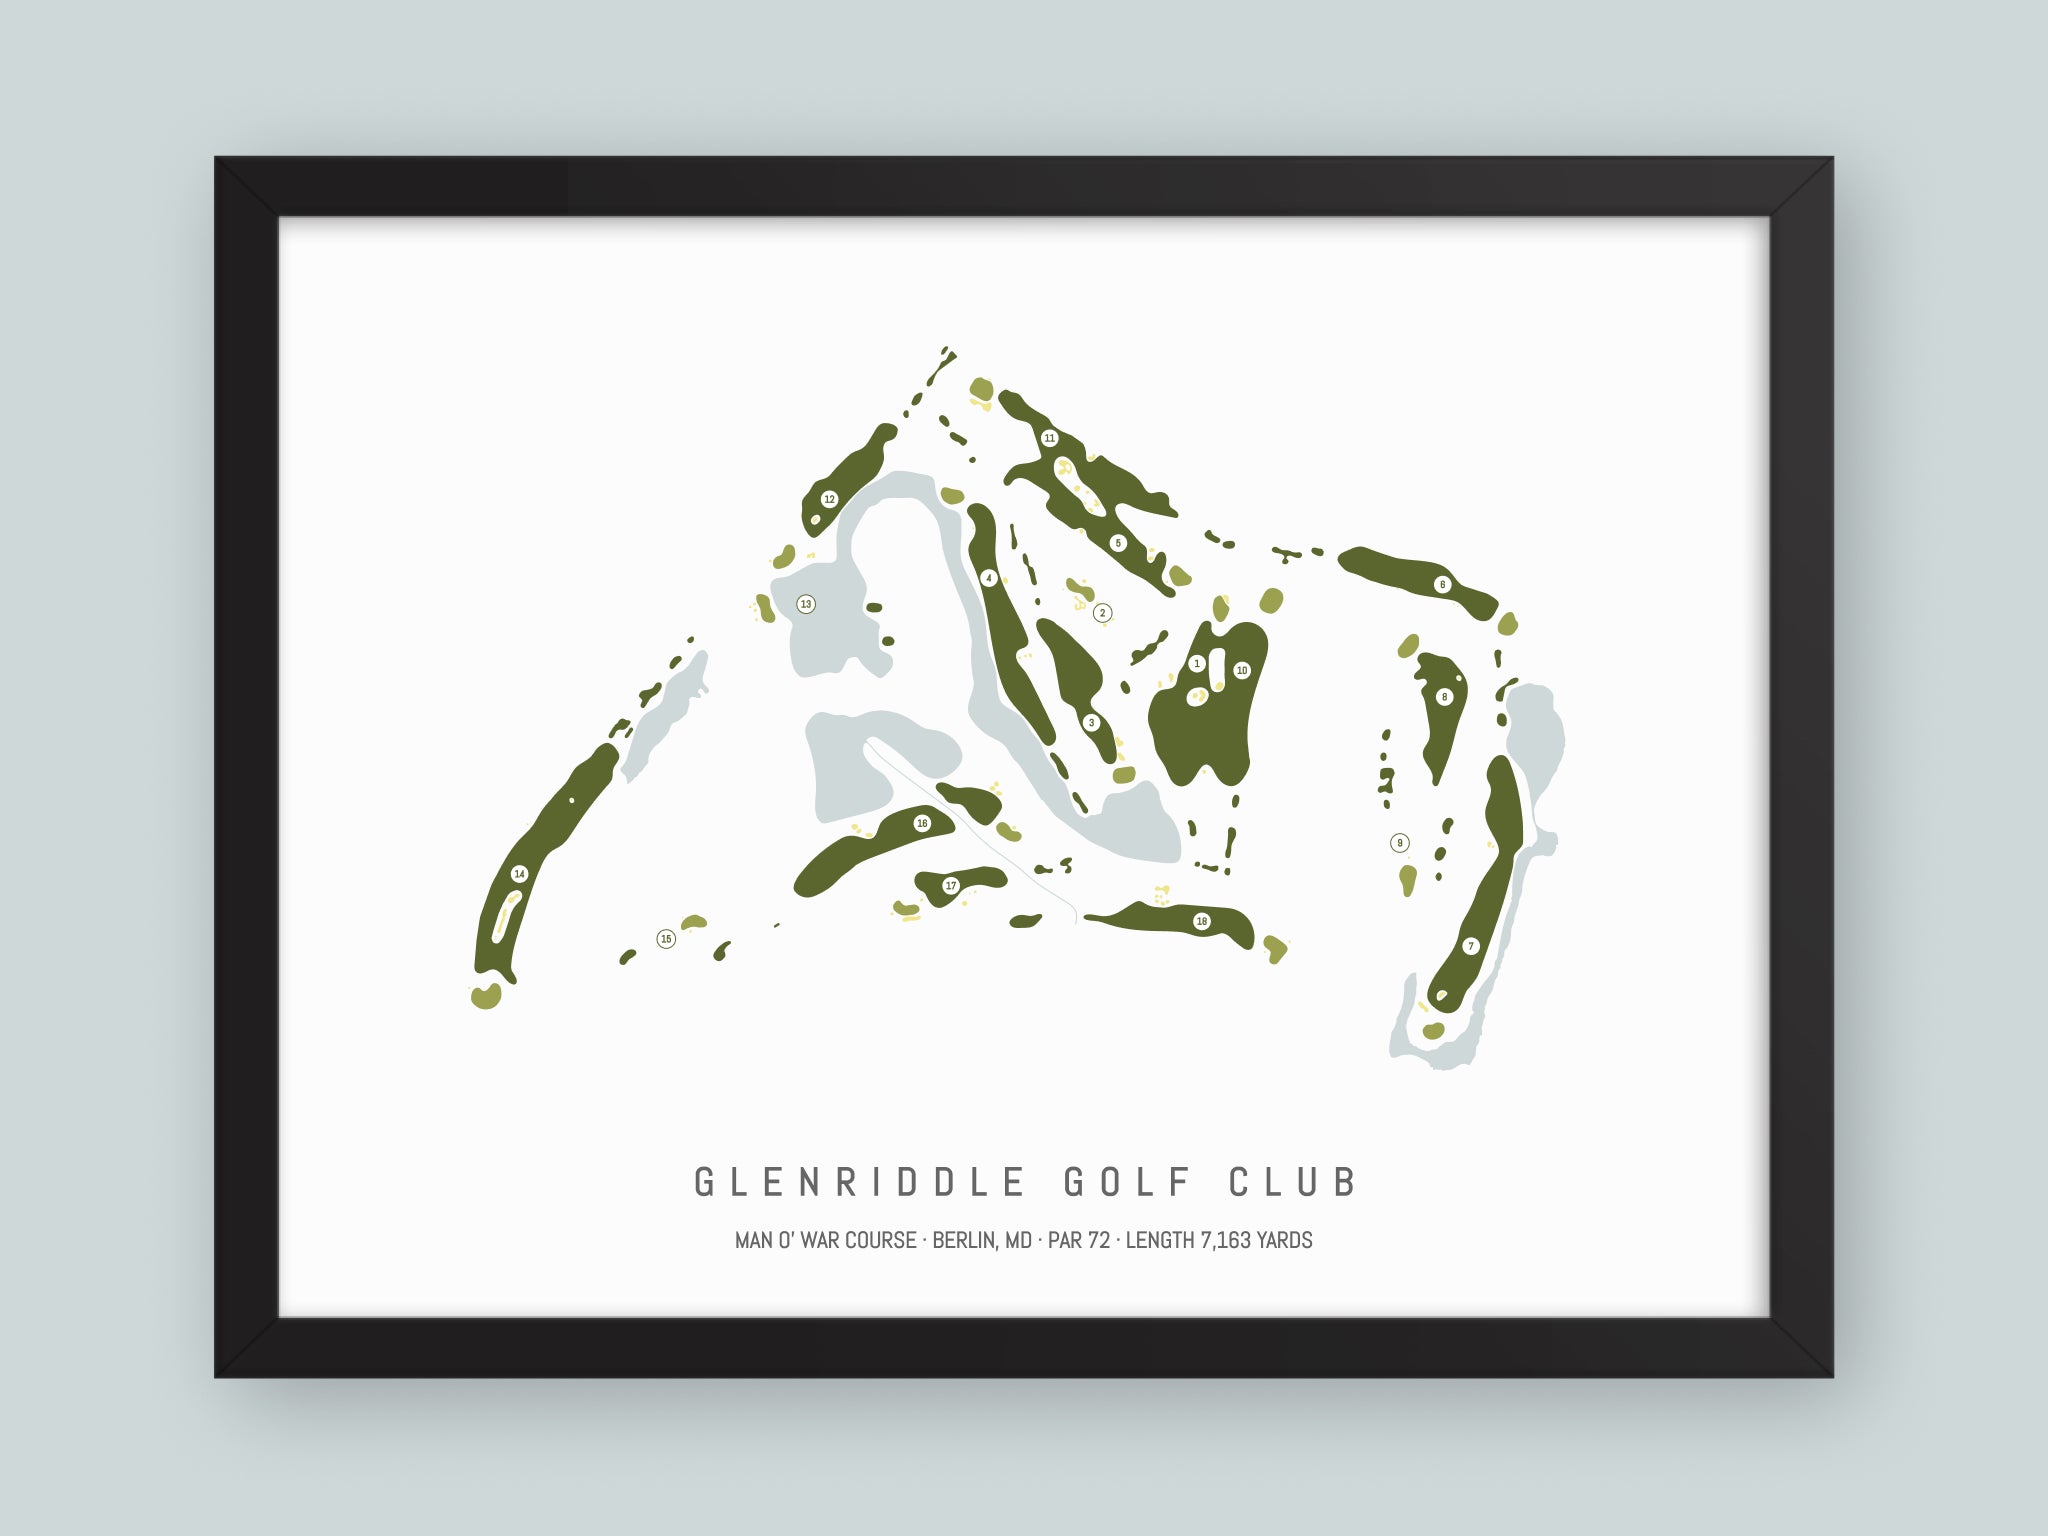 GlenRiddle-Golf-Club-Man-O-War-Course-MD--Black-Frame-24x18-With-Hole-Numbers